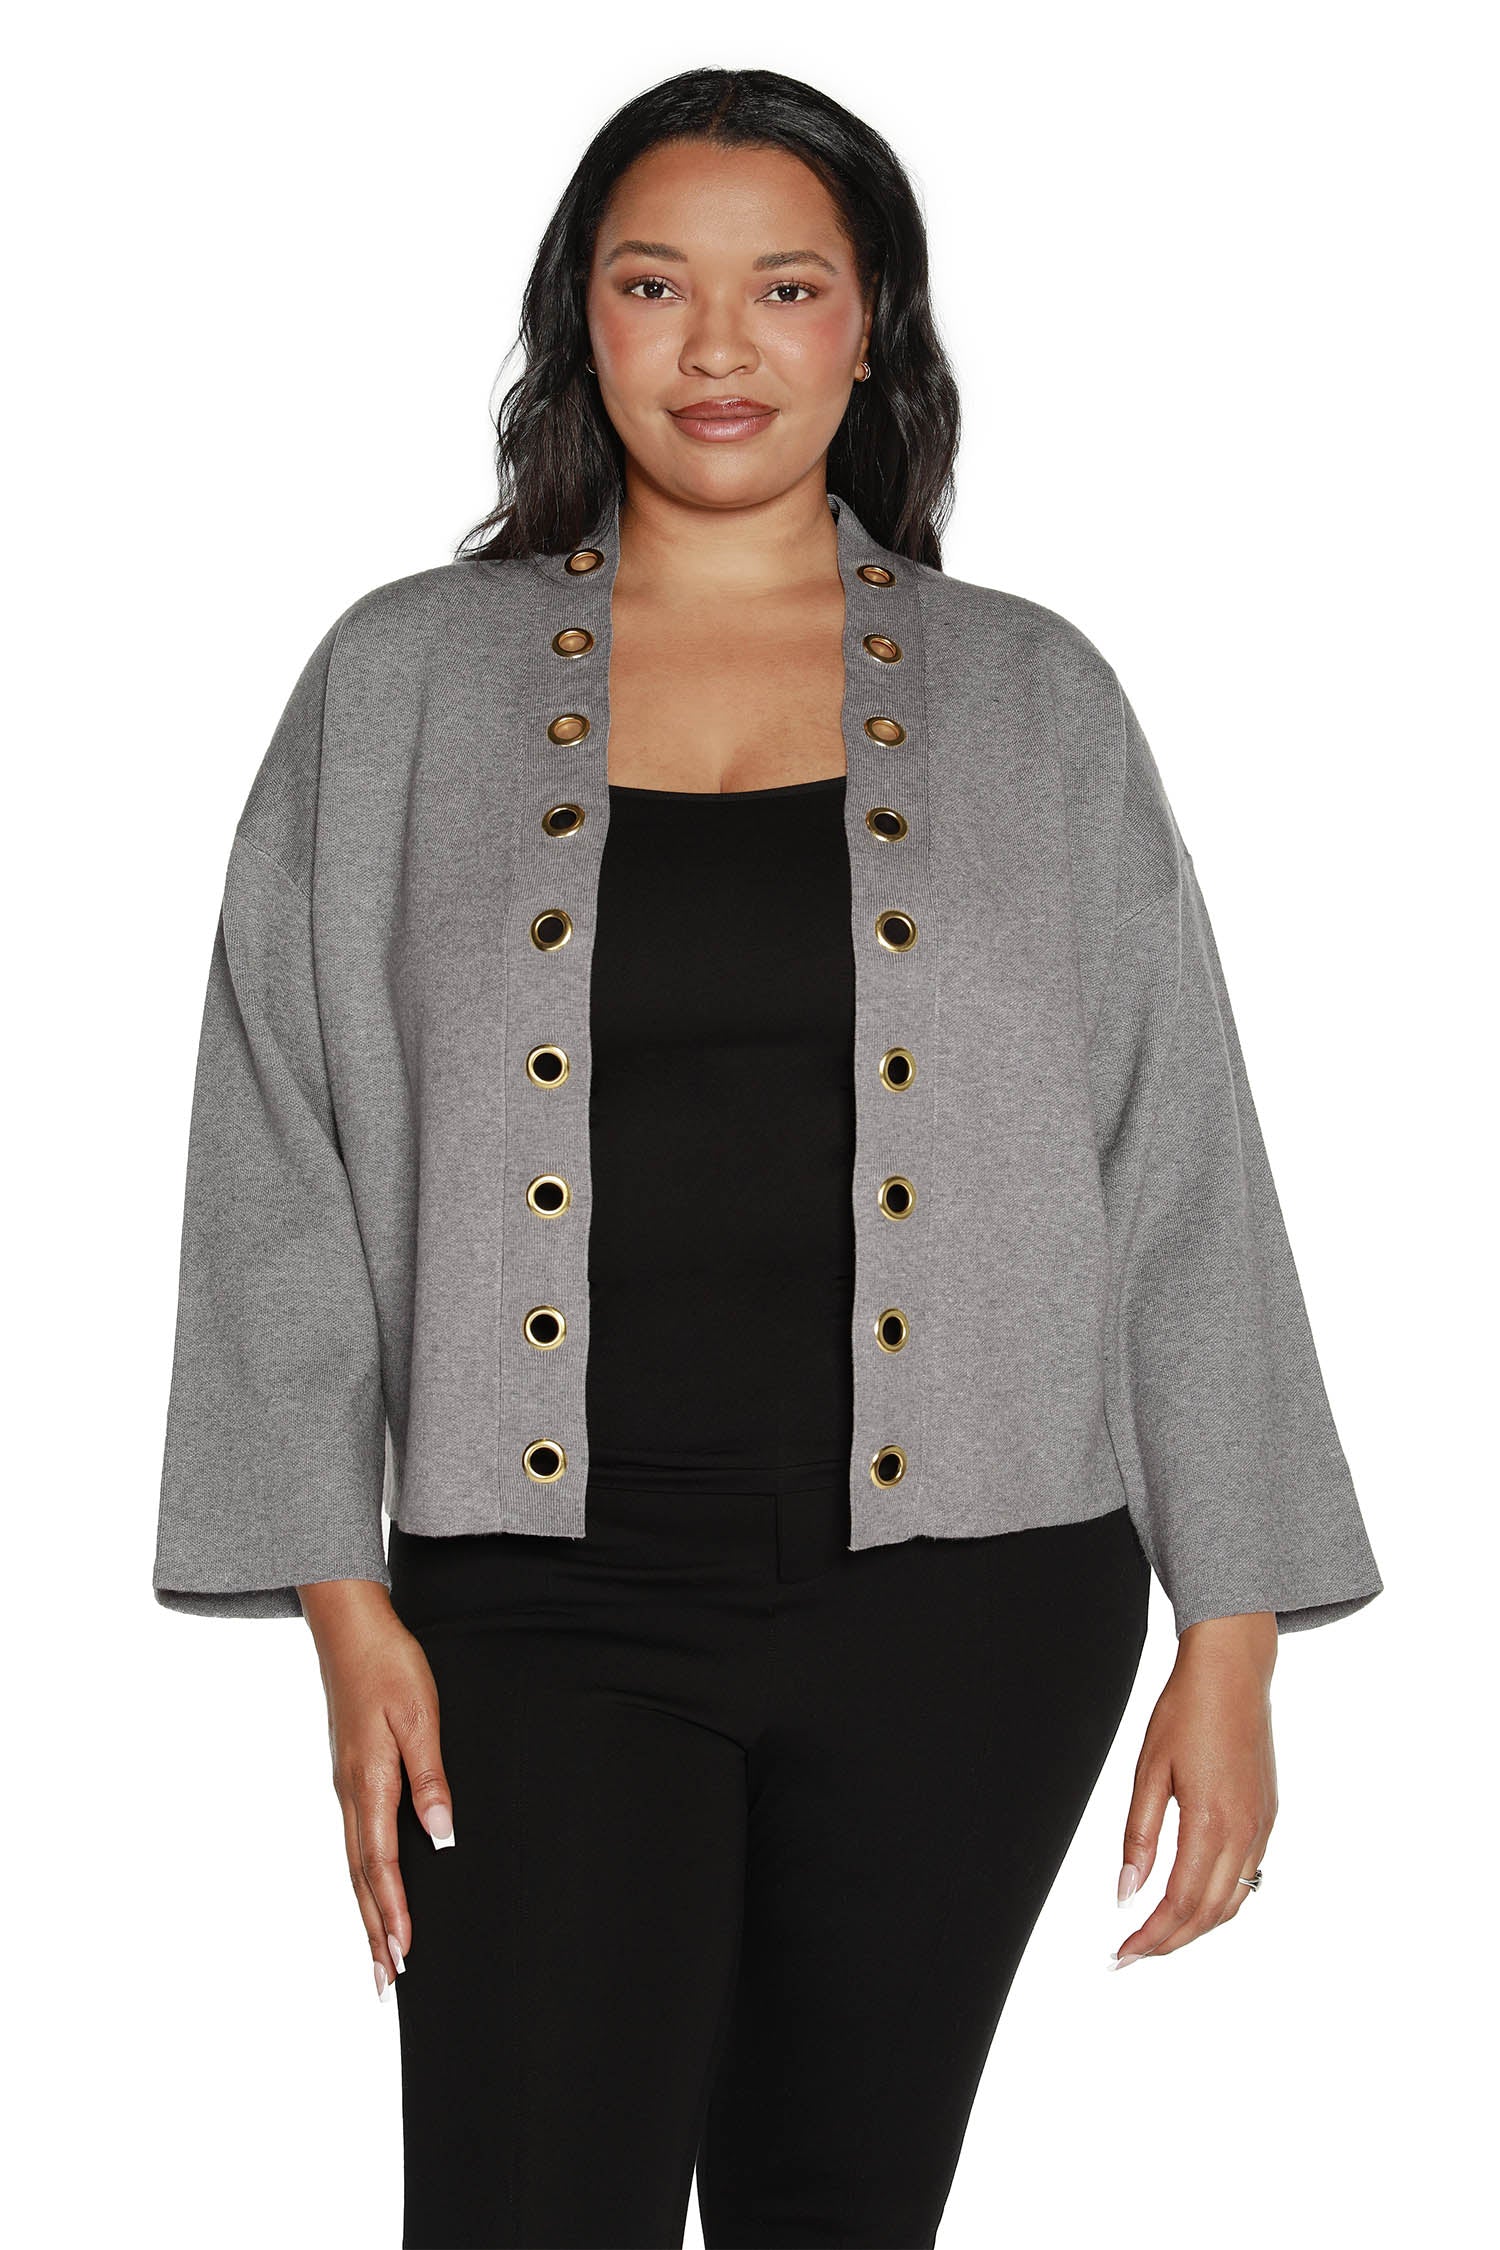 Women's Boxy Cardigan Sweater with Gold Grommet Detail| Curvy